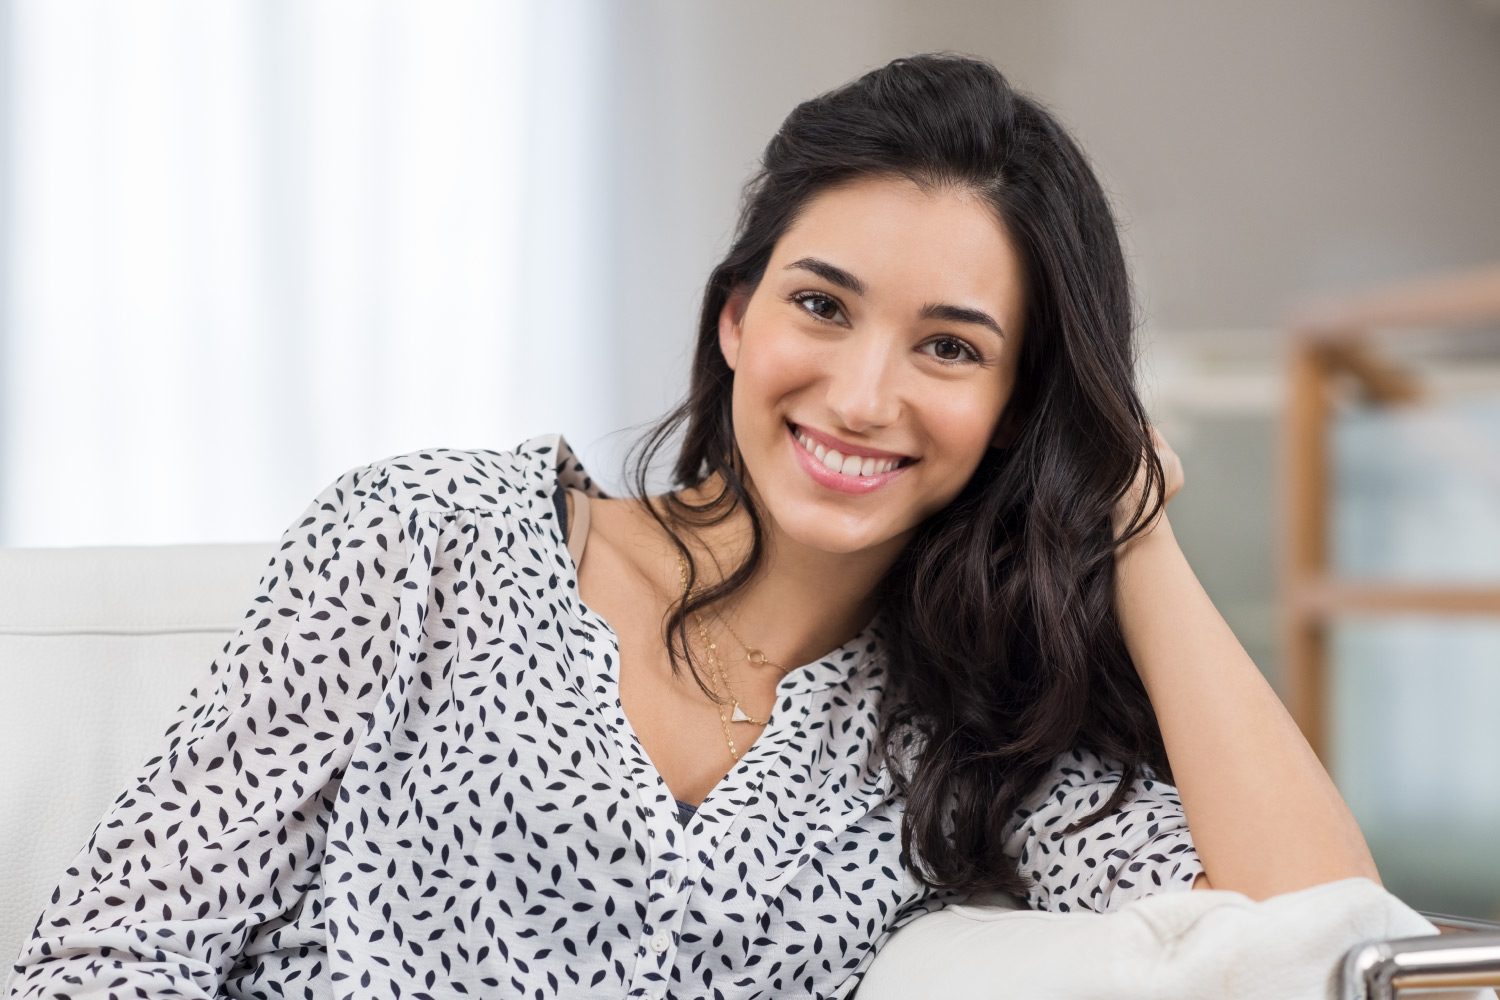 Brunette woman in a polka dot shirt smiles because she is a good candidate for dental implants in Denver, CO